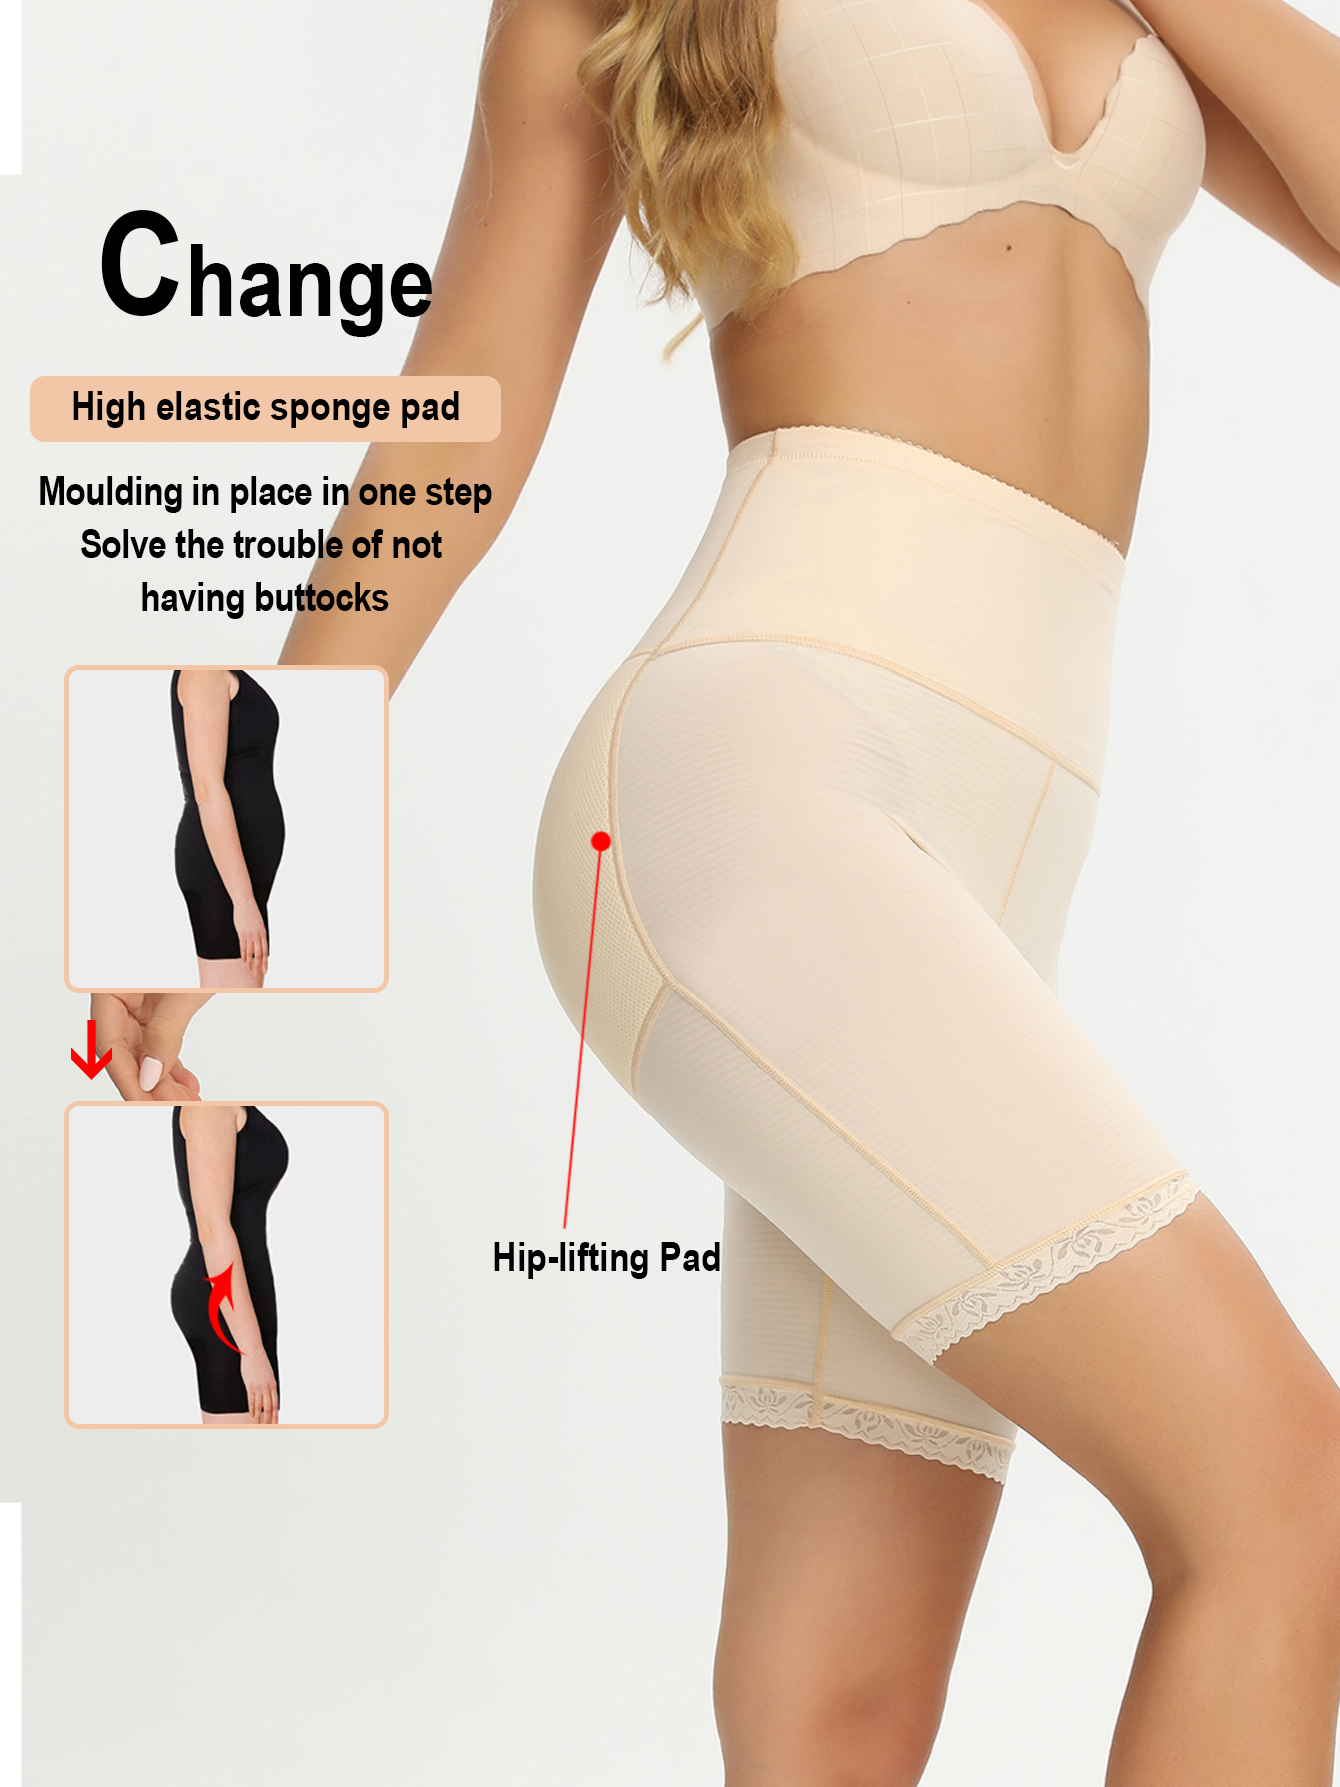 Upgraded Butt And Hip Pads With Tummy Control For Womens Gym Enhance And  Control With Sponge Padded Butt Shaper Pants From Zhao07, $19.22